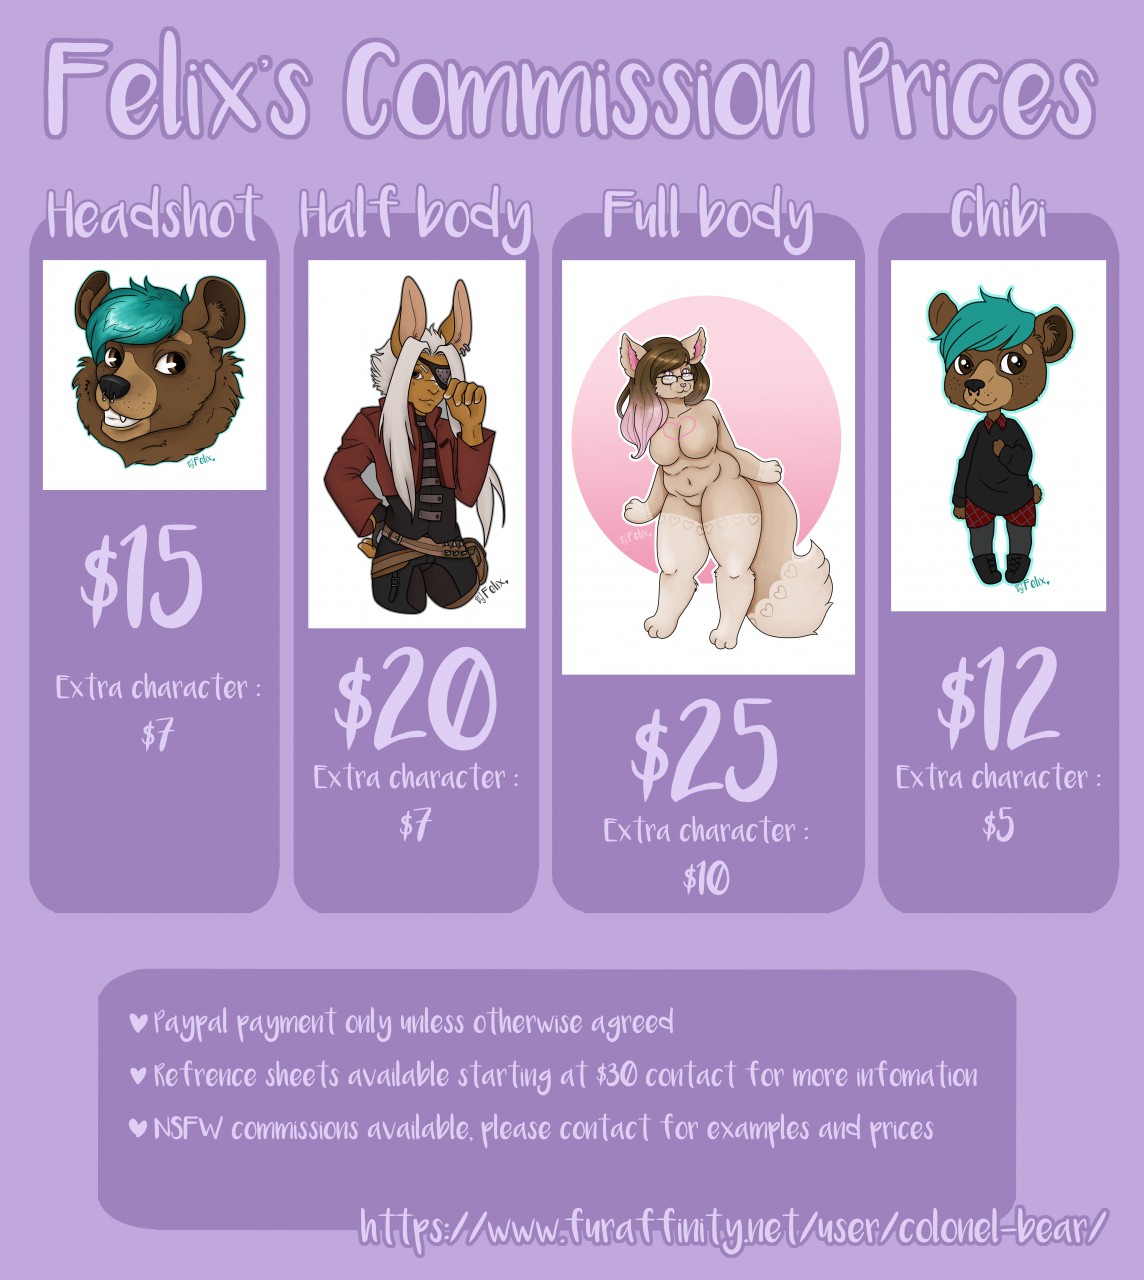 1514293584.colonel-bear_commission_prices.jpg